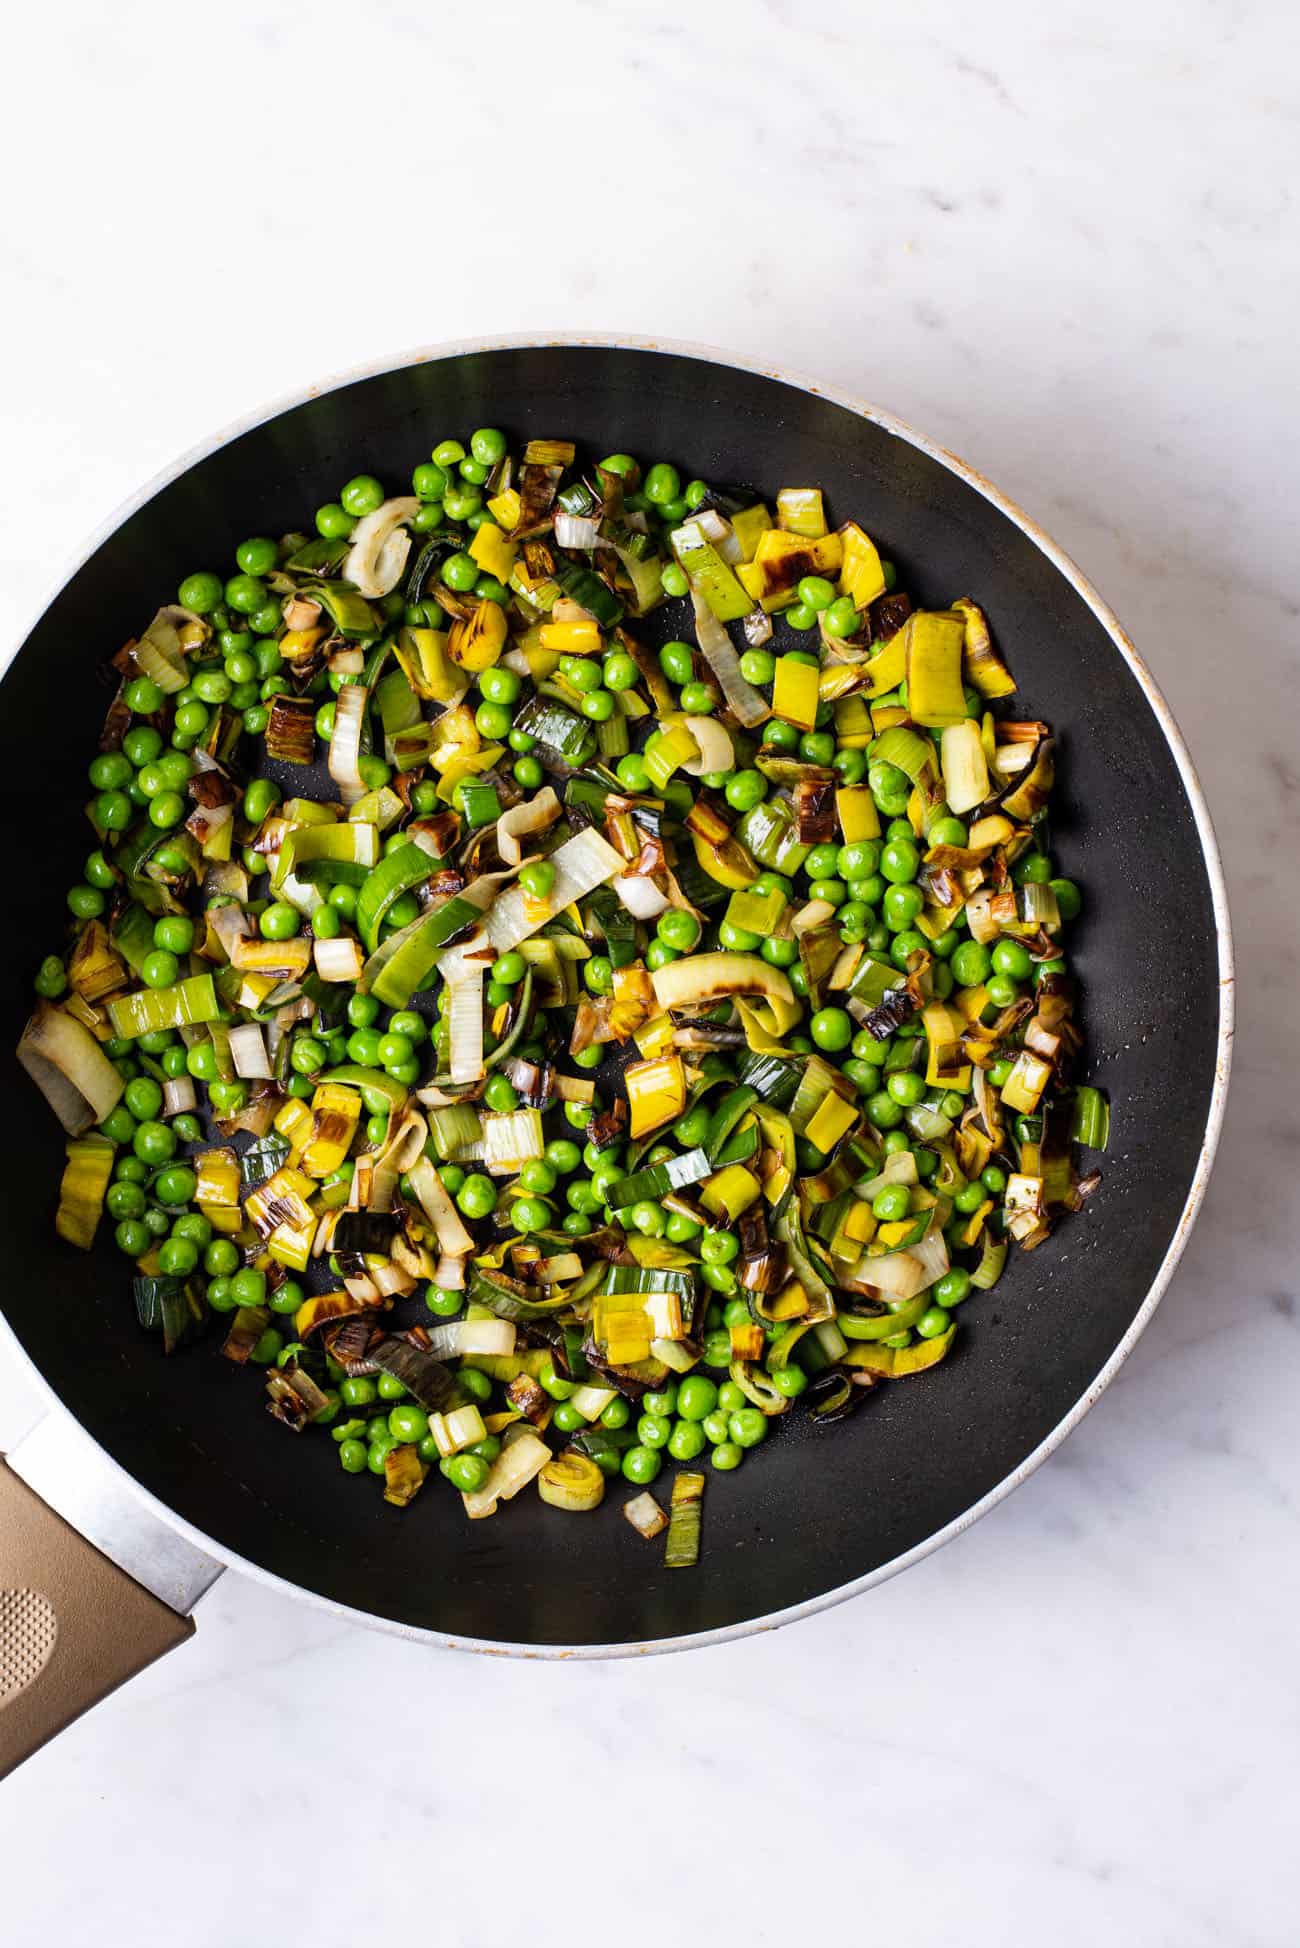 Fried leeks and peas in a skillet.